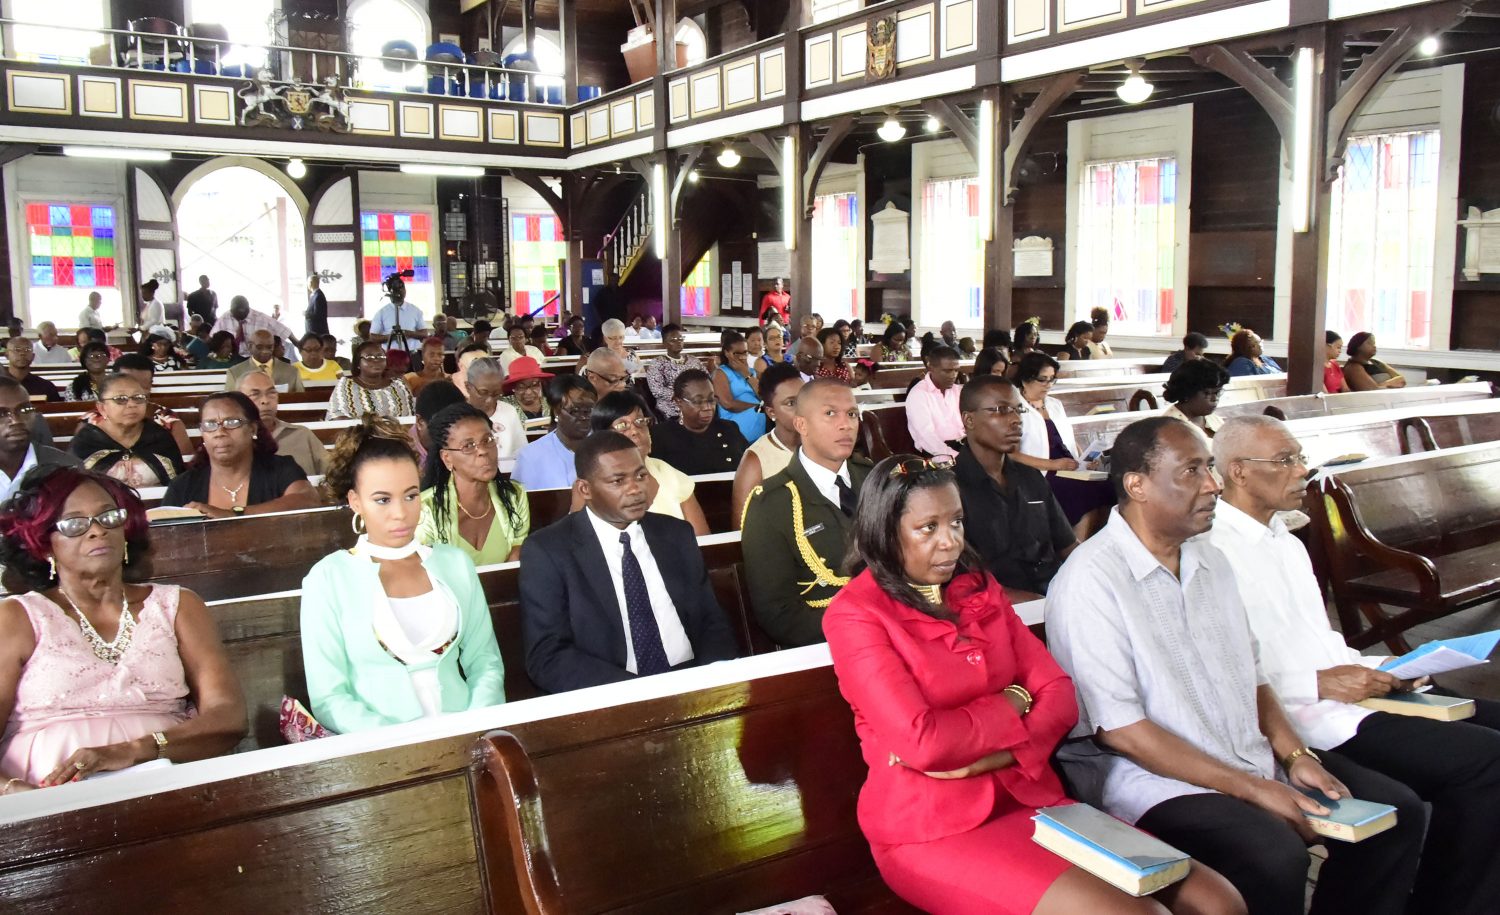  President David Granger (right in front pew) yesterday  attended the Guyana Public Service Union’s 95th Anniversary church service at the St. Andrews Kirk after which he hosted a brunch for the Union’s Executive and members at the Baridi Benab at State House.  Sitting next to the President is the Head of the GPSU, Patrick Yarde. (Ministry of the Presidency photo)

